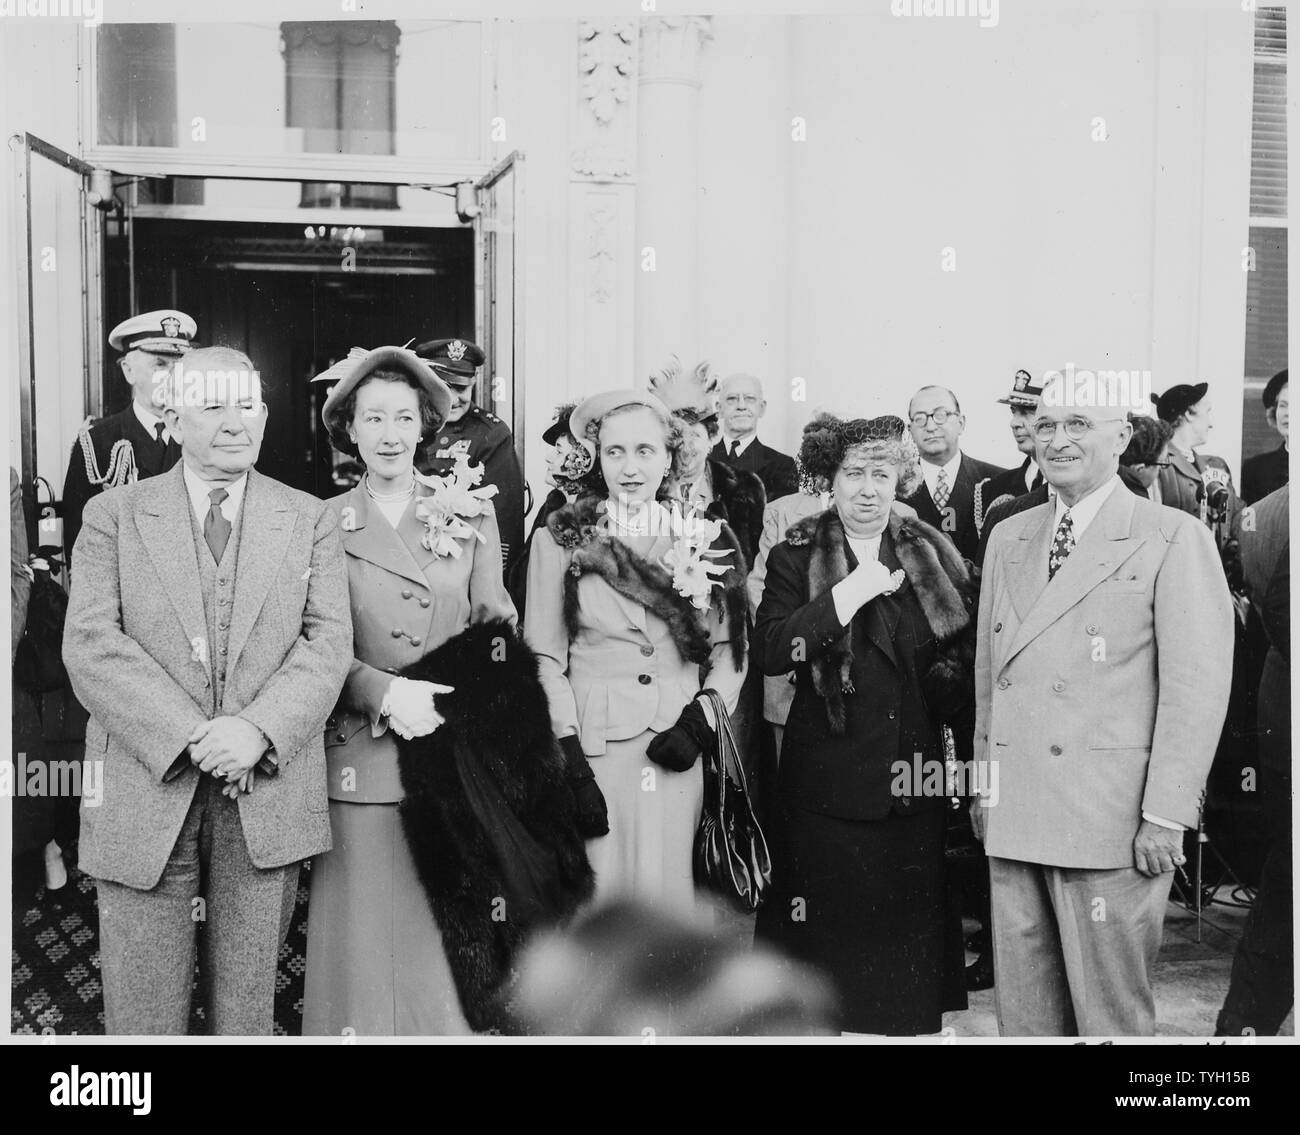 President and Mrs. Harry S. Truman, Alben W. Barkley, Mrs. Max Truitt, and Margaret Truman posing together, with other dignitaries standing behind them. President Truman and Vice President-elect Barkley had just returned to Washington after winning the election of 1948. Stock Photo